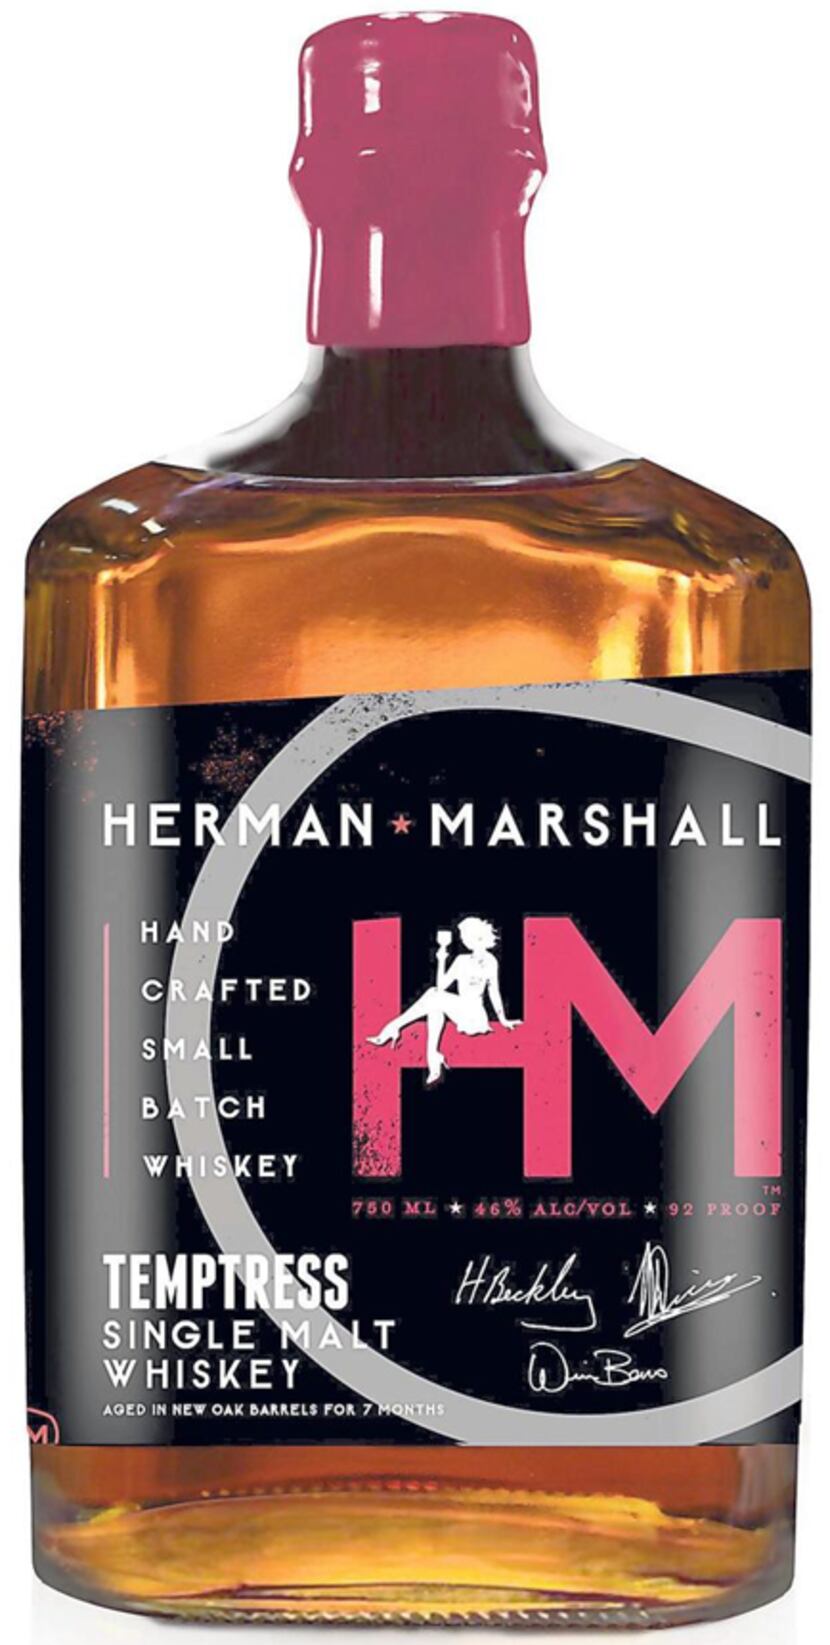 Herman Marshall Temptress whiskey is a limited time offering.